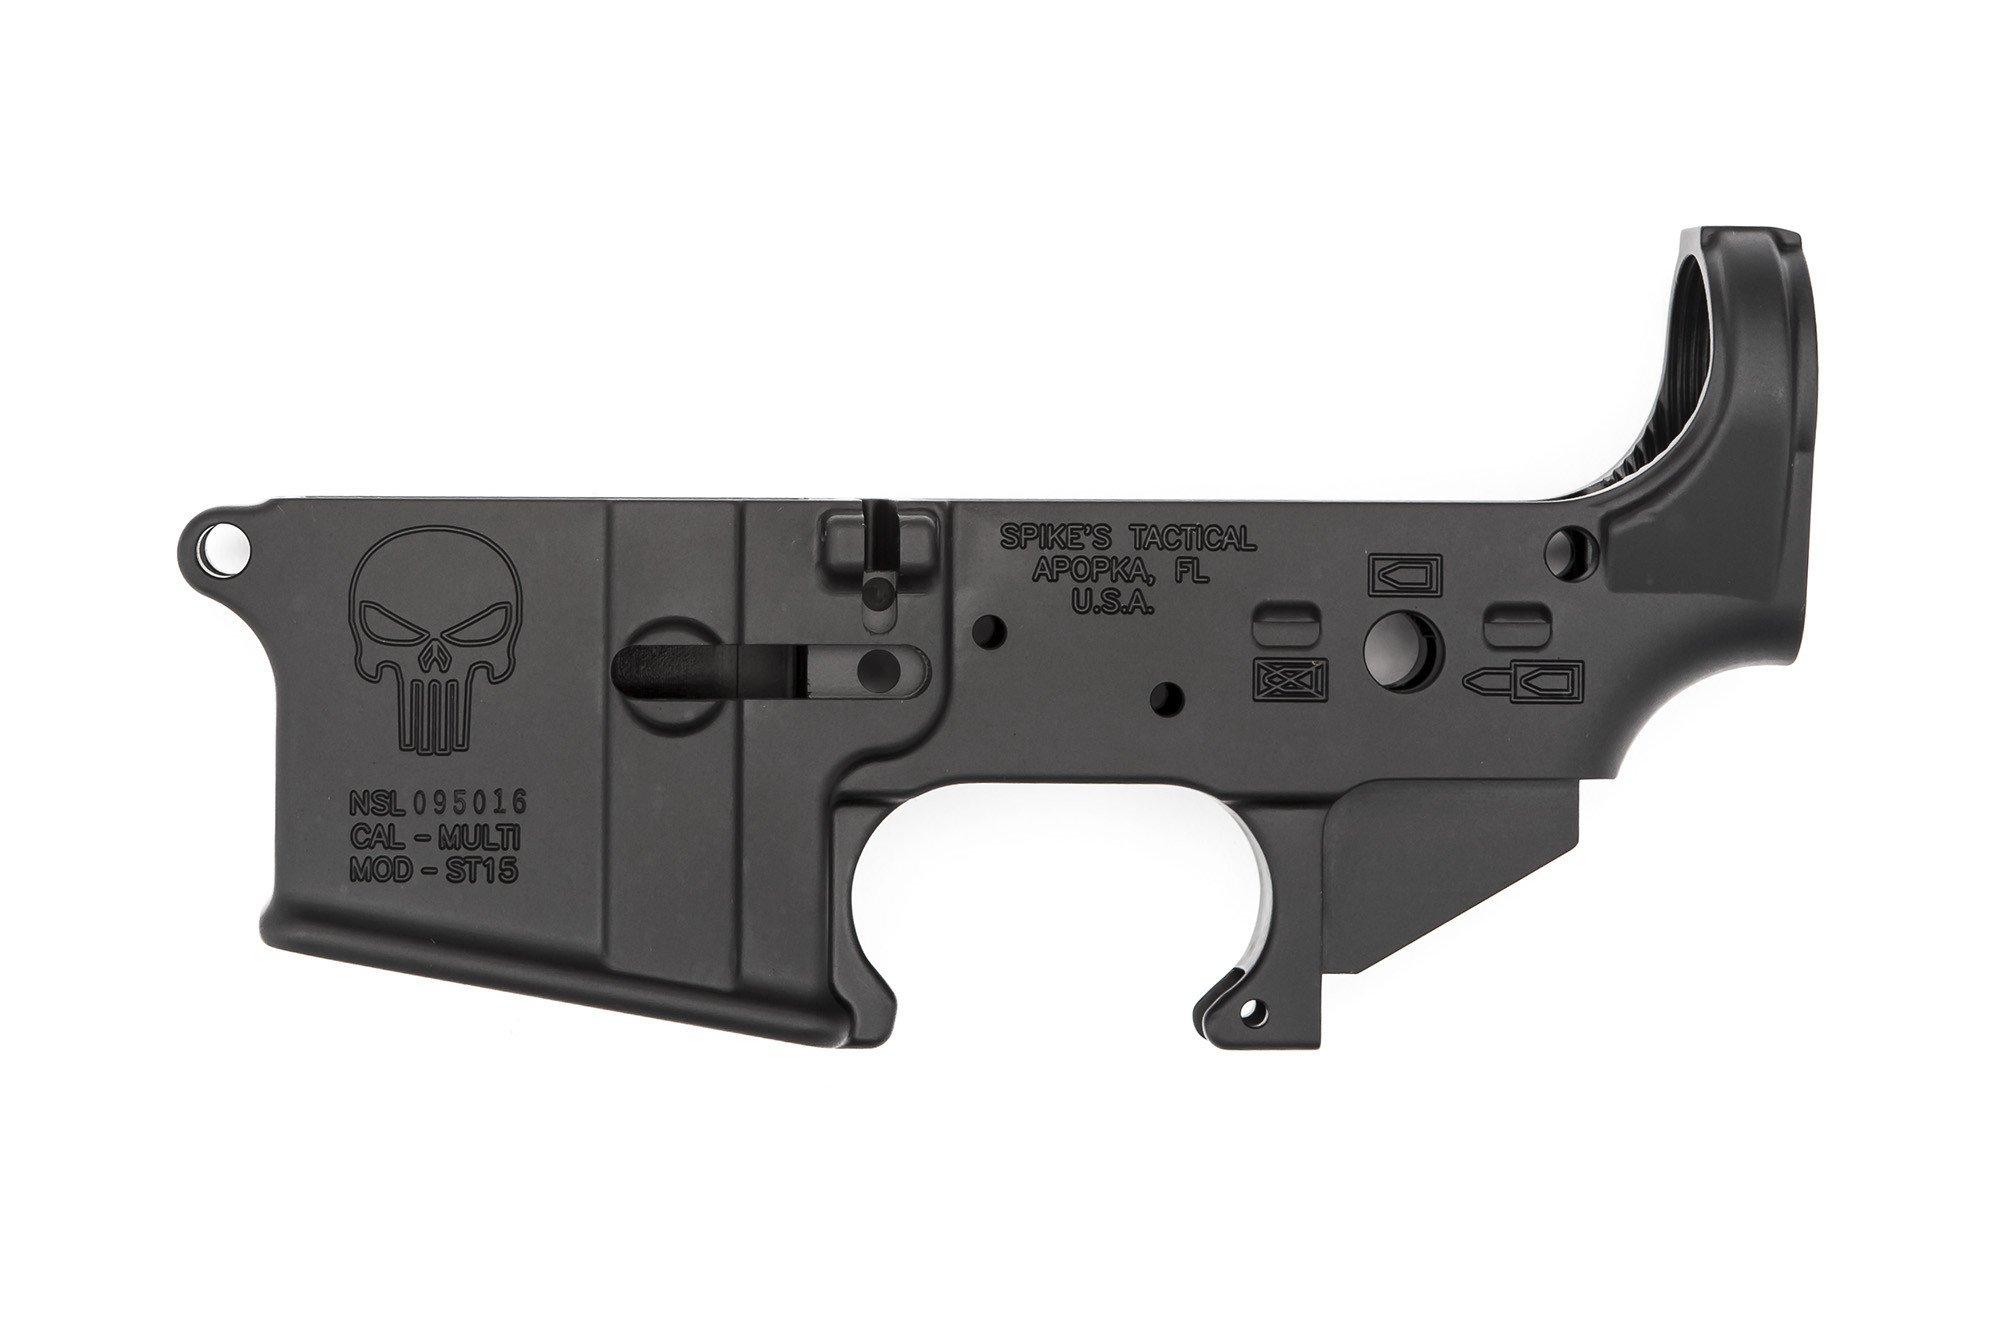  Spikes Tactical Punisher Stripped Lower Receiver Stls015